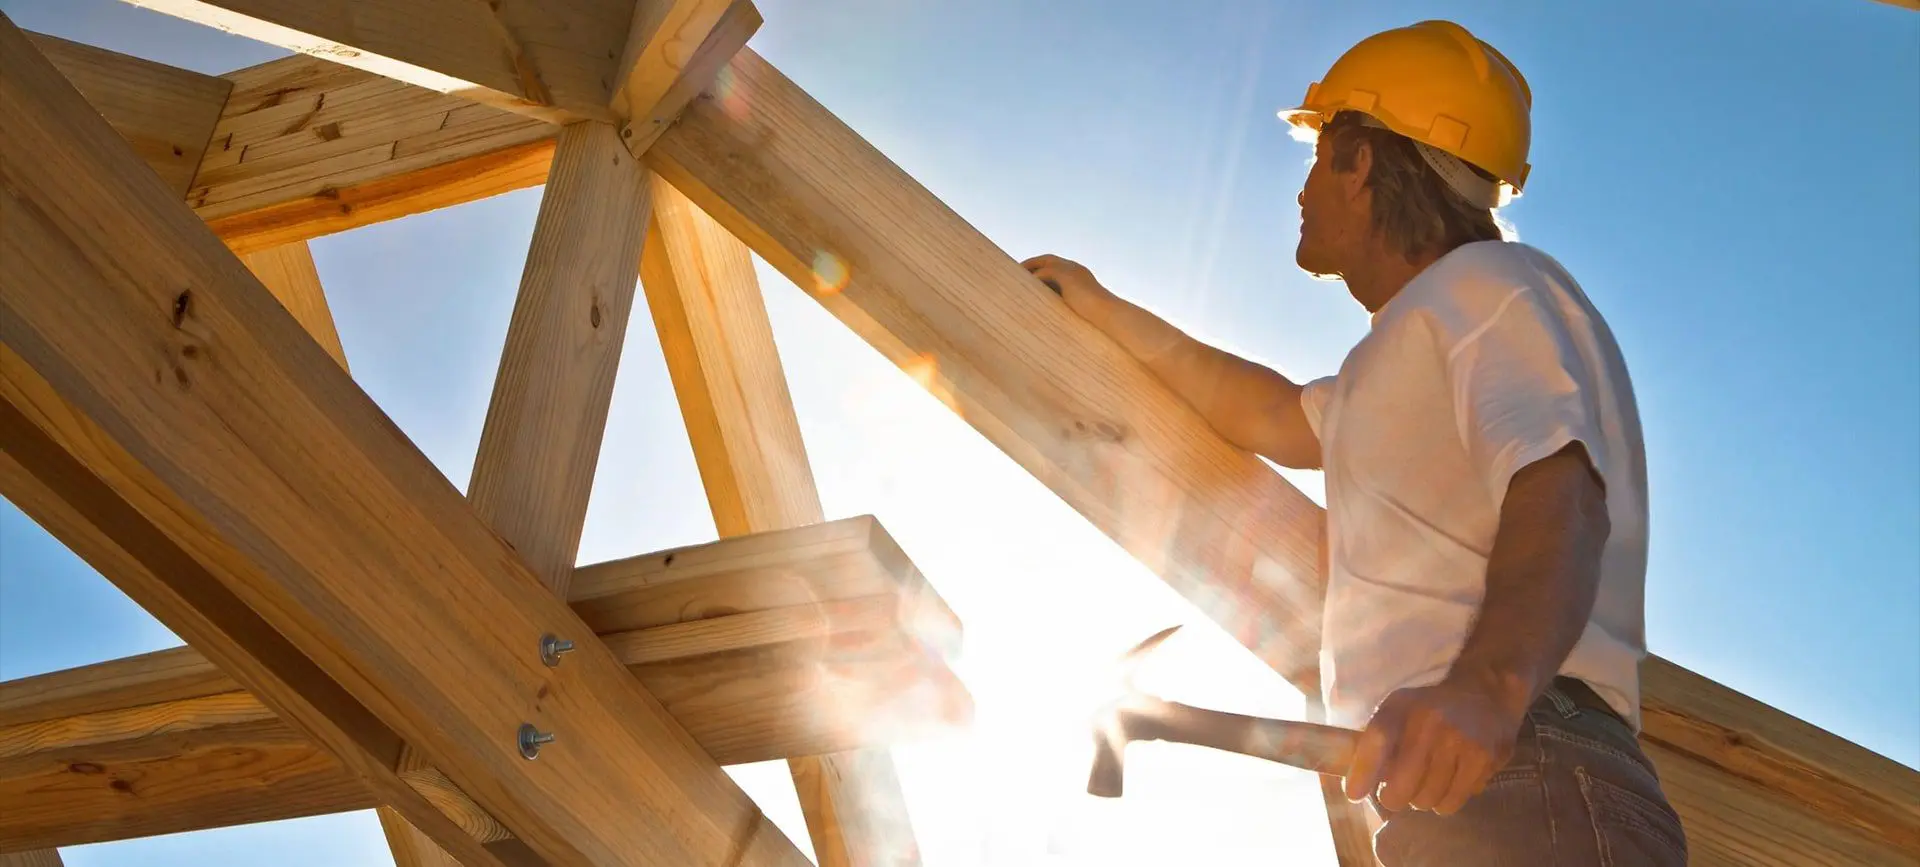 A man in yellow hard hat working on wooden structure.